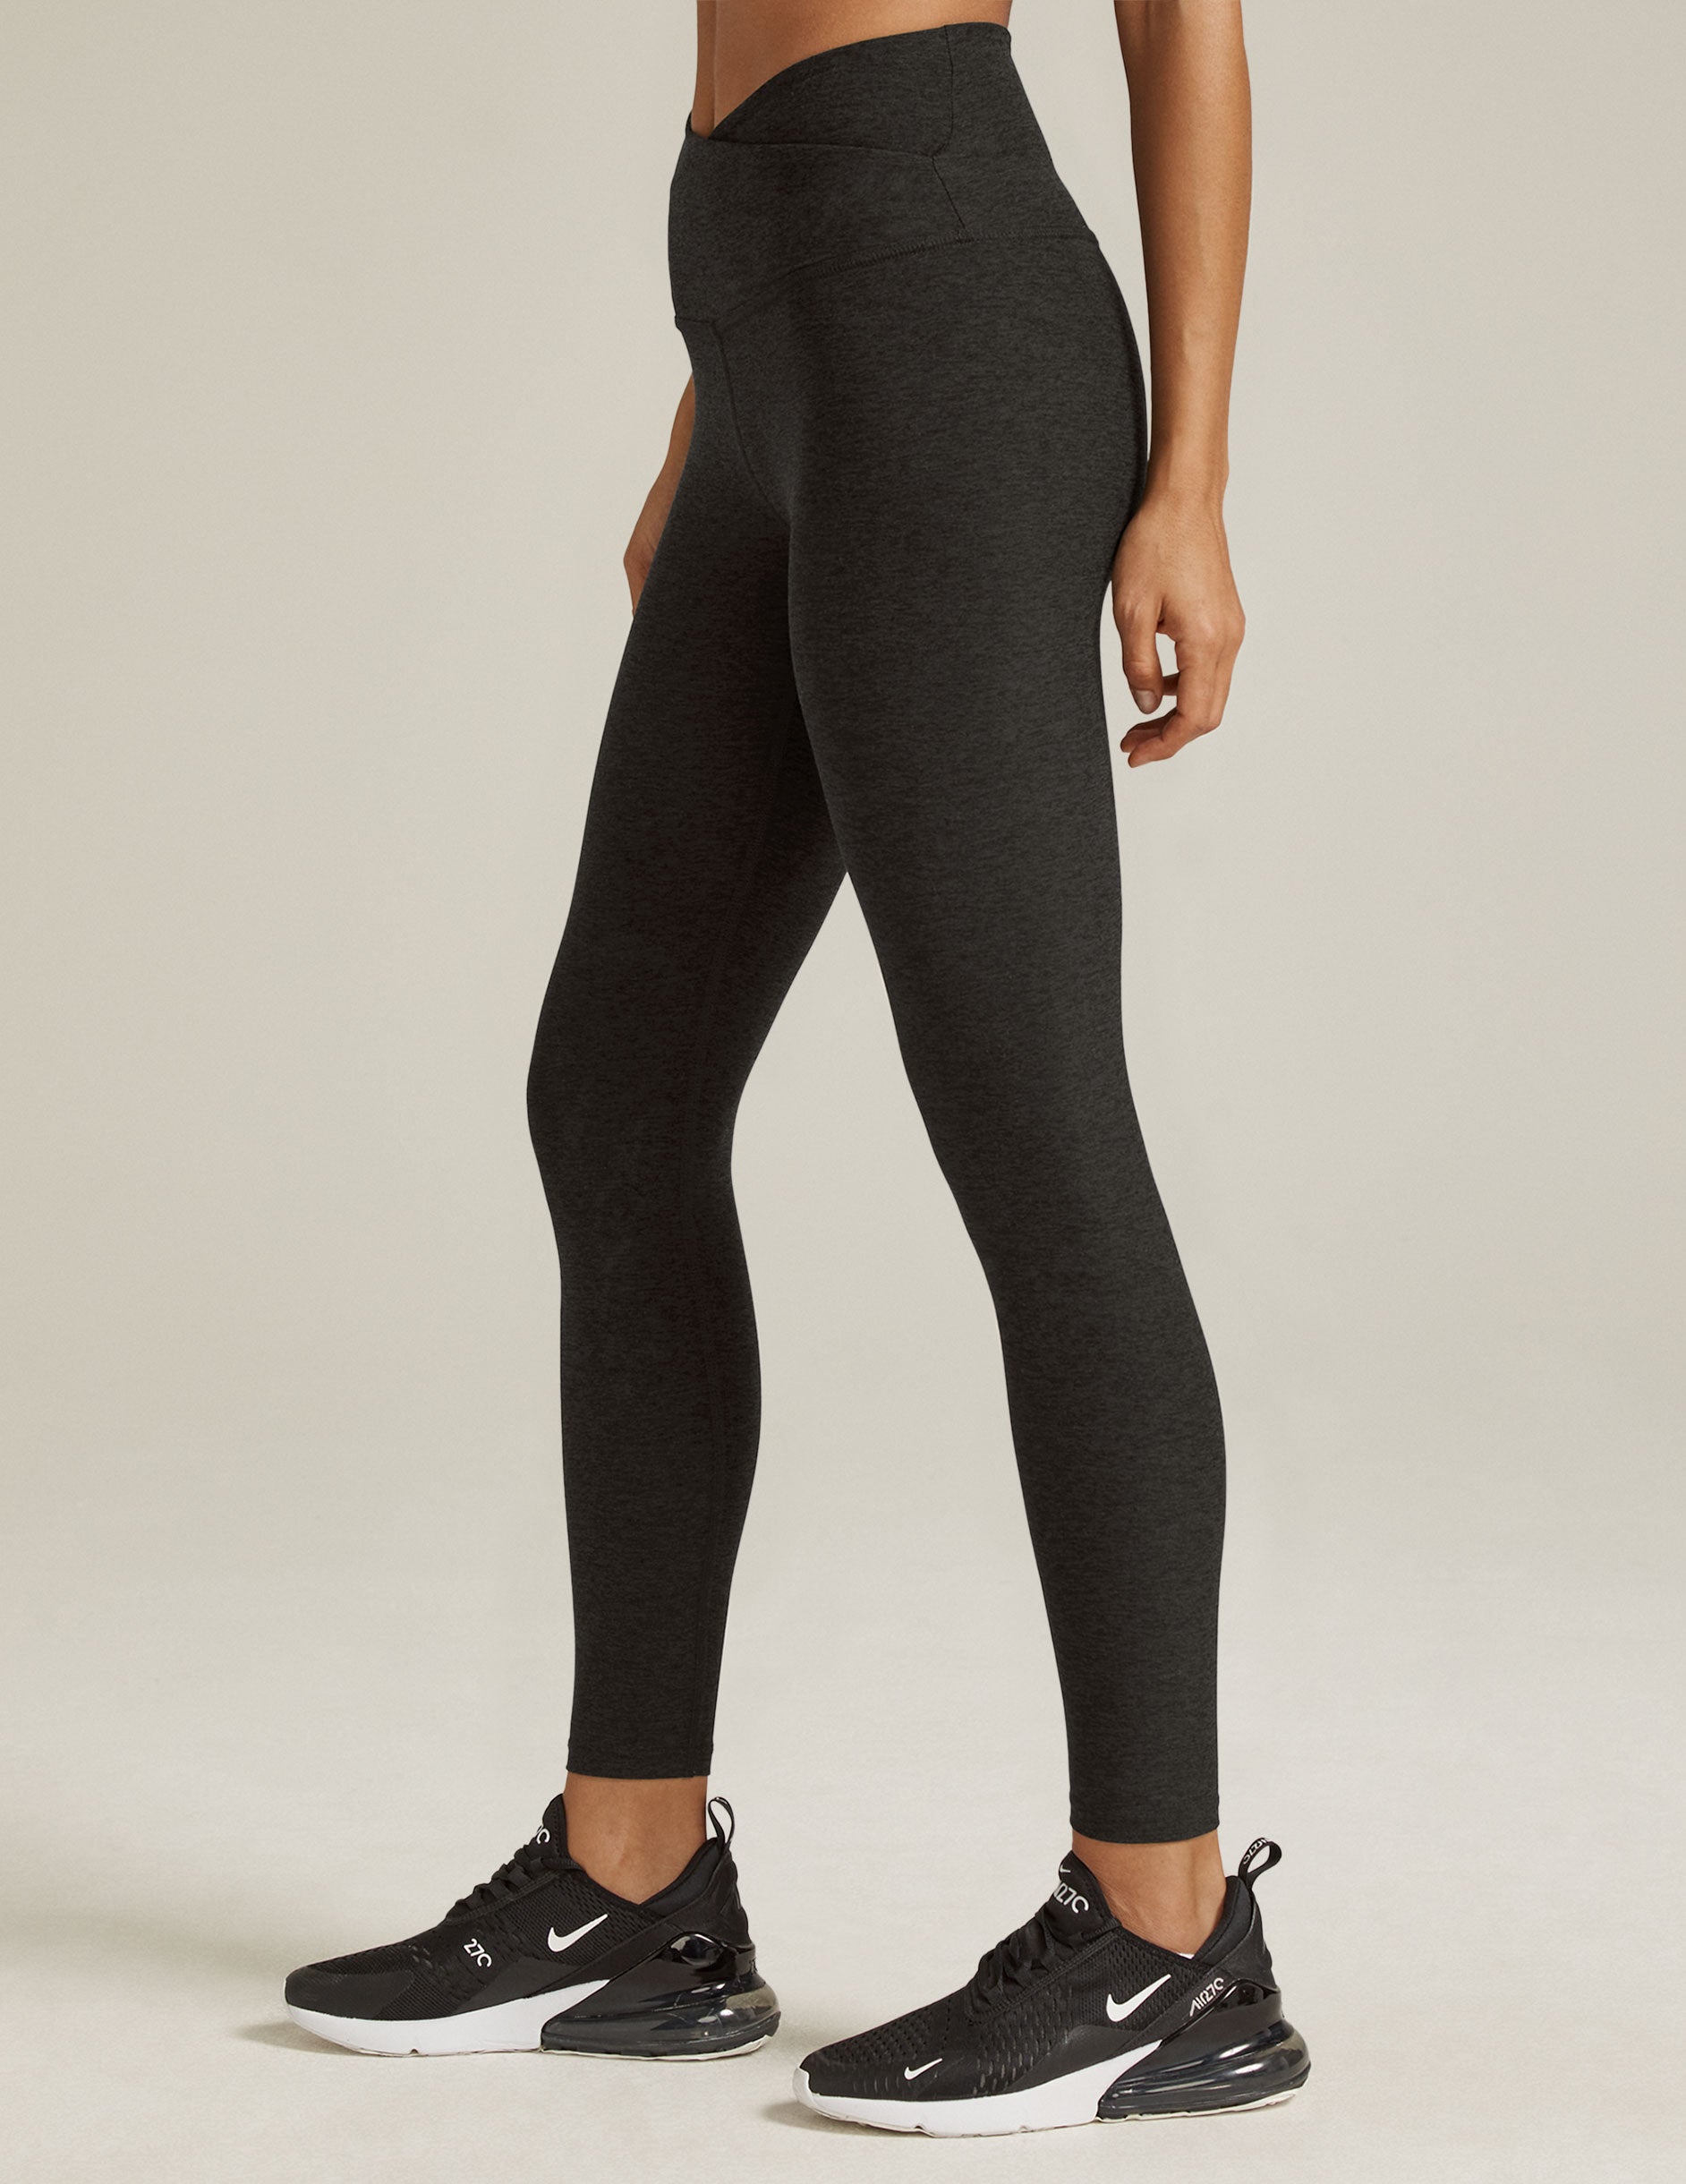 Beyond Yoga Spacedye At Your Leisure High Waisted Legging Black SD3463 -  Free Shipping at Largo Drive